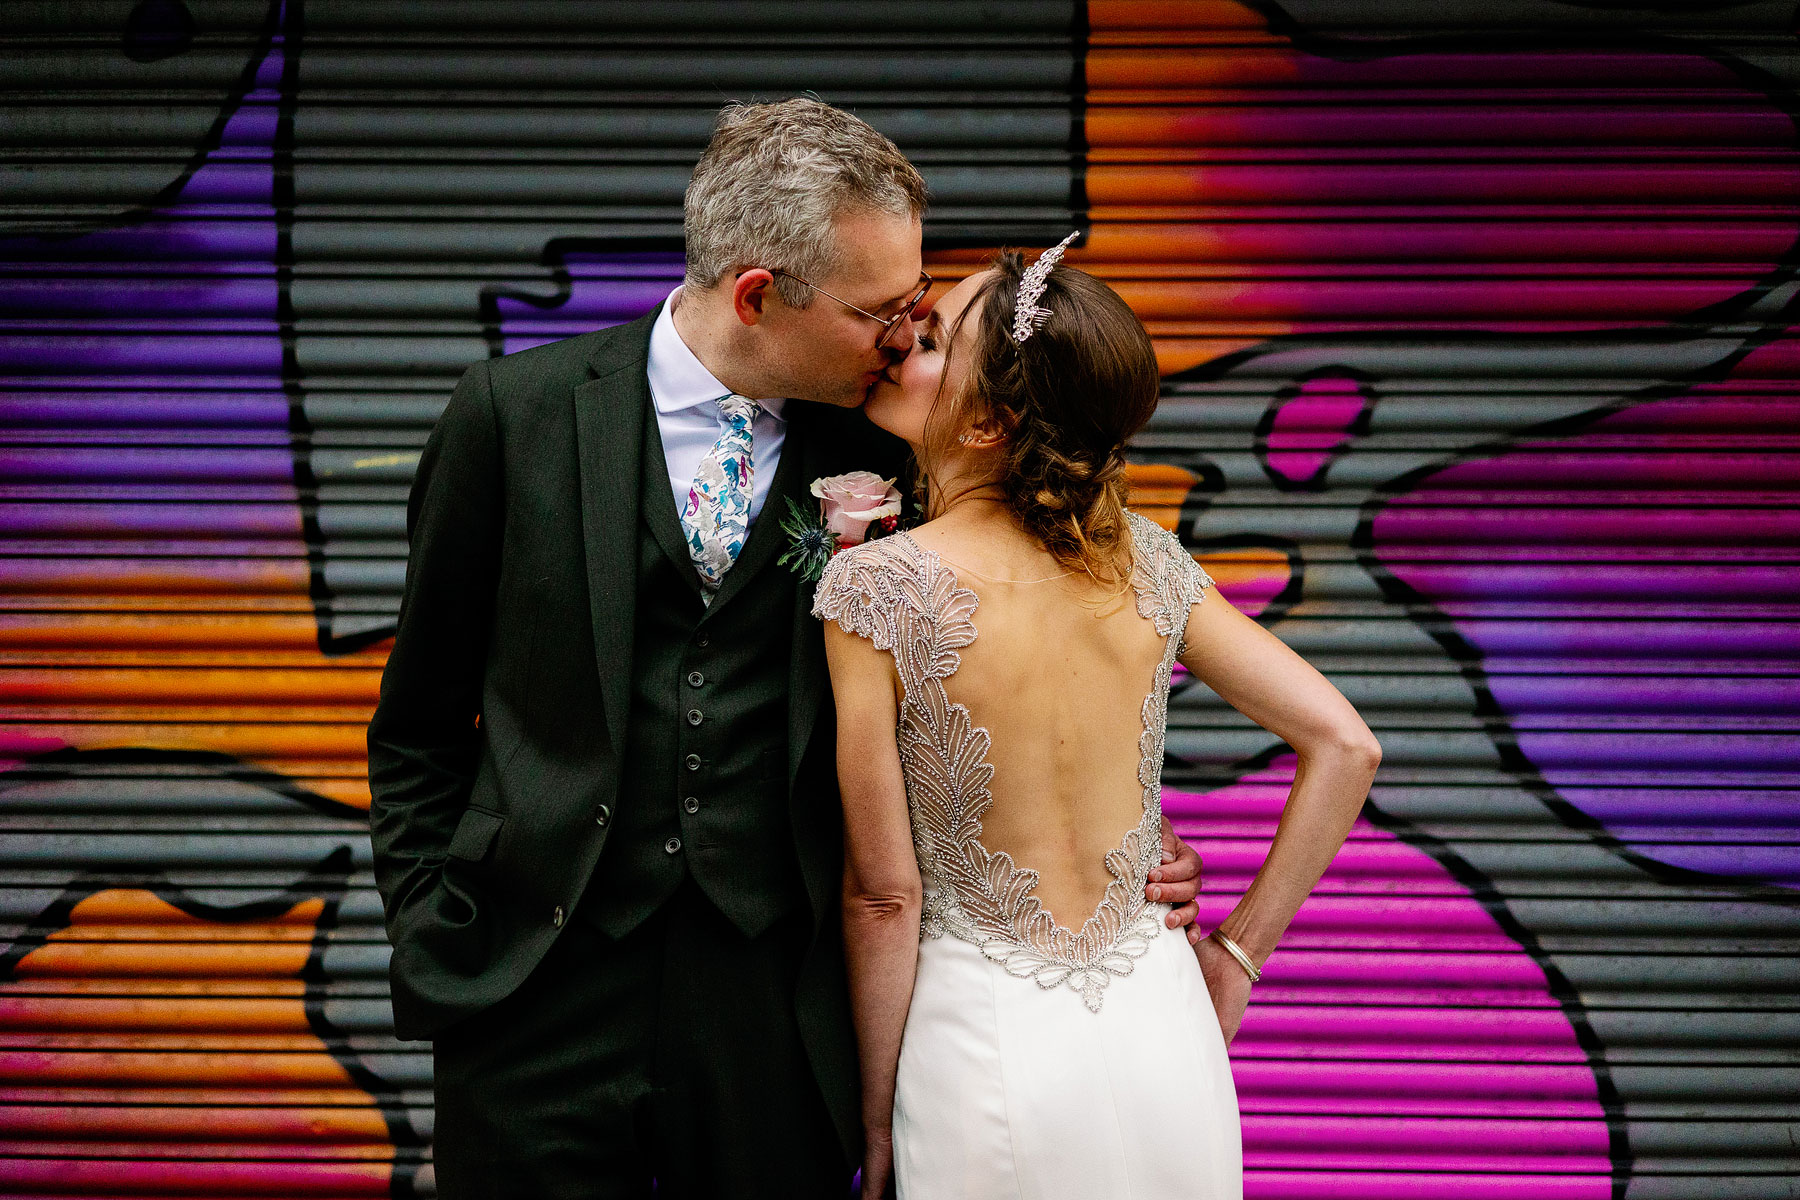 colourful wedding images in leeds with a bride wearing backless dress